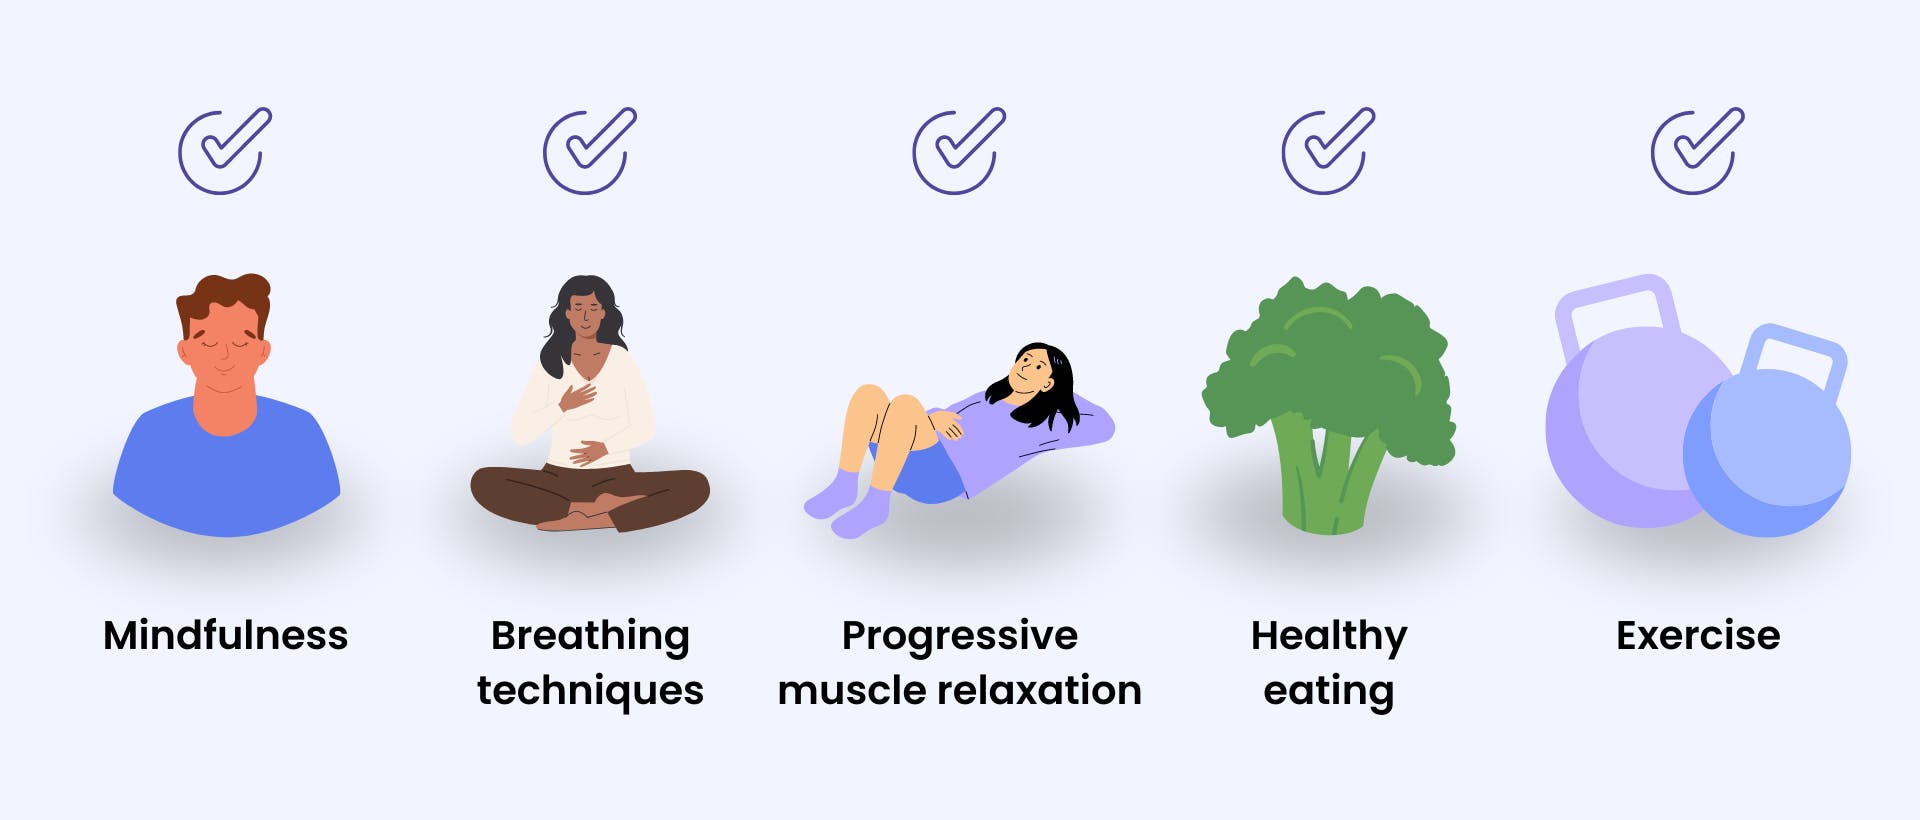 Graphic shows coping strategies for anxiety, which include mindfulness, breathing techniques, progressive muscle relaxtion, healthy eating, and exercise